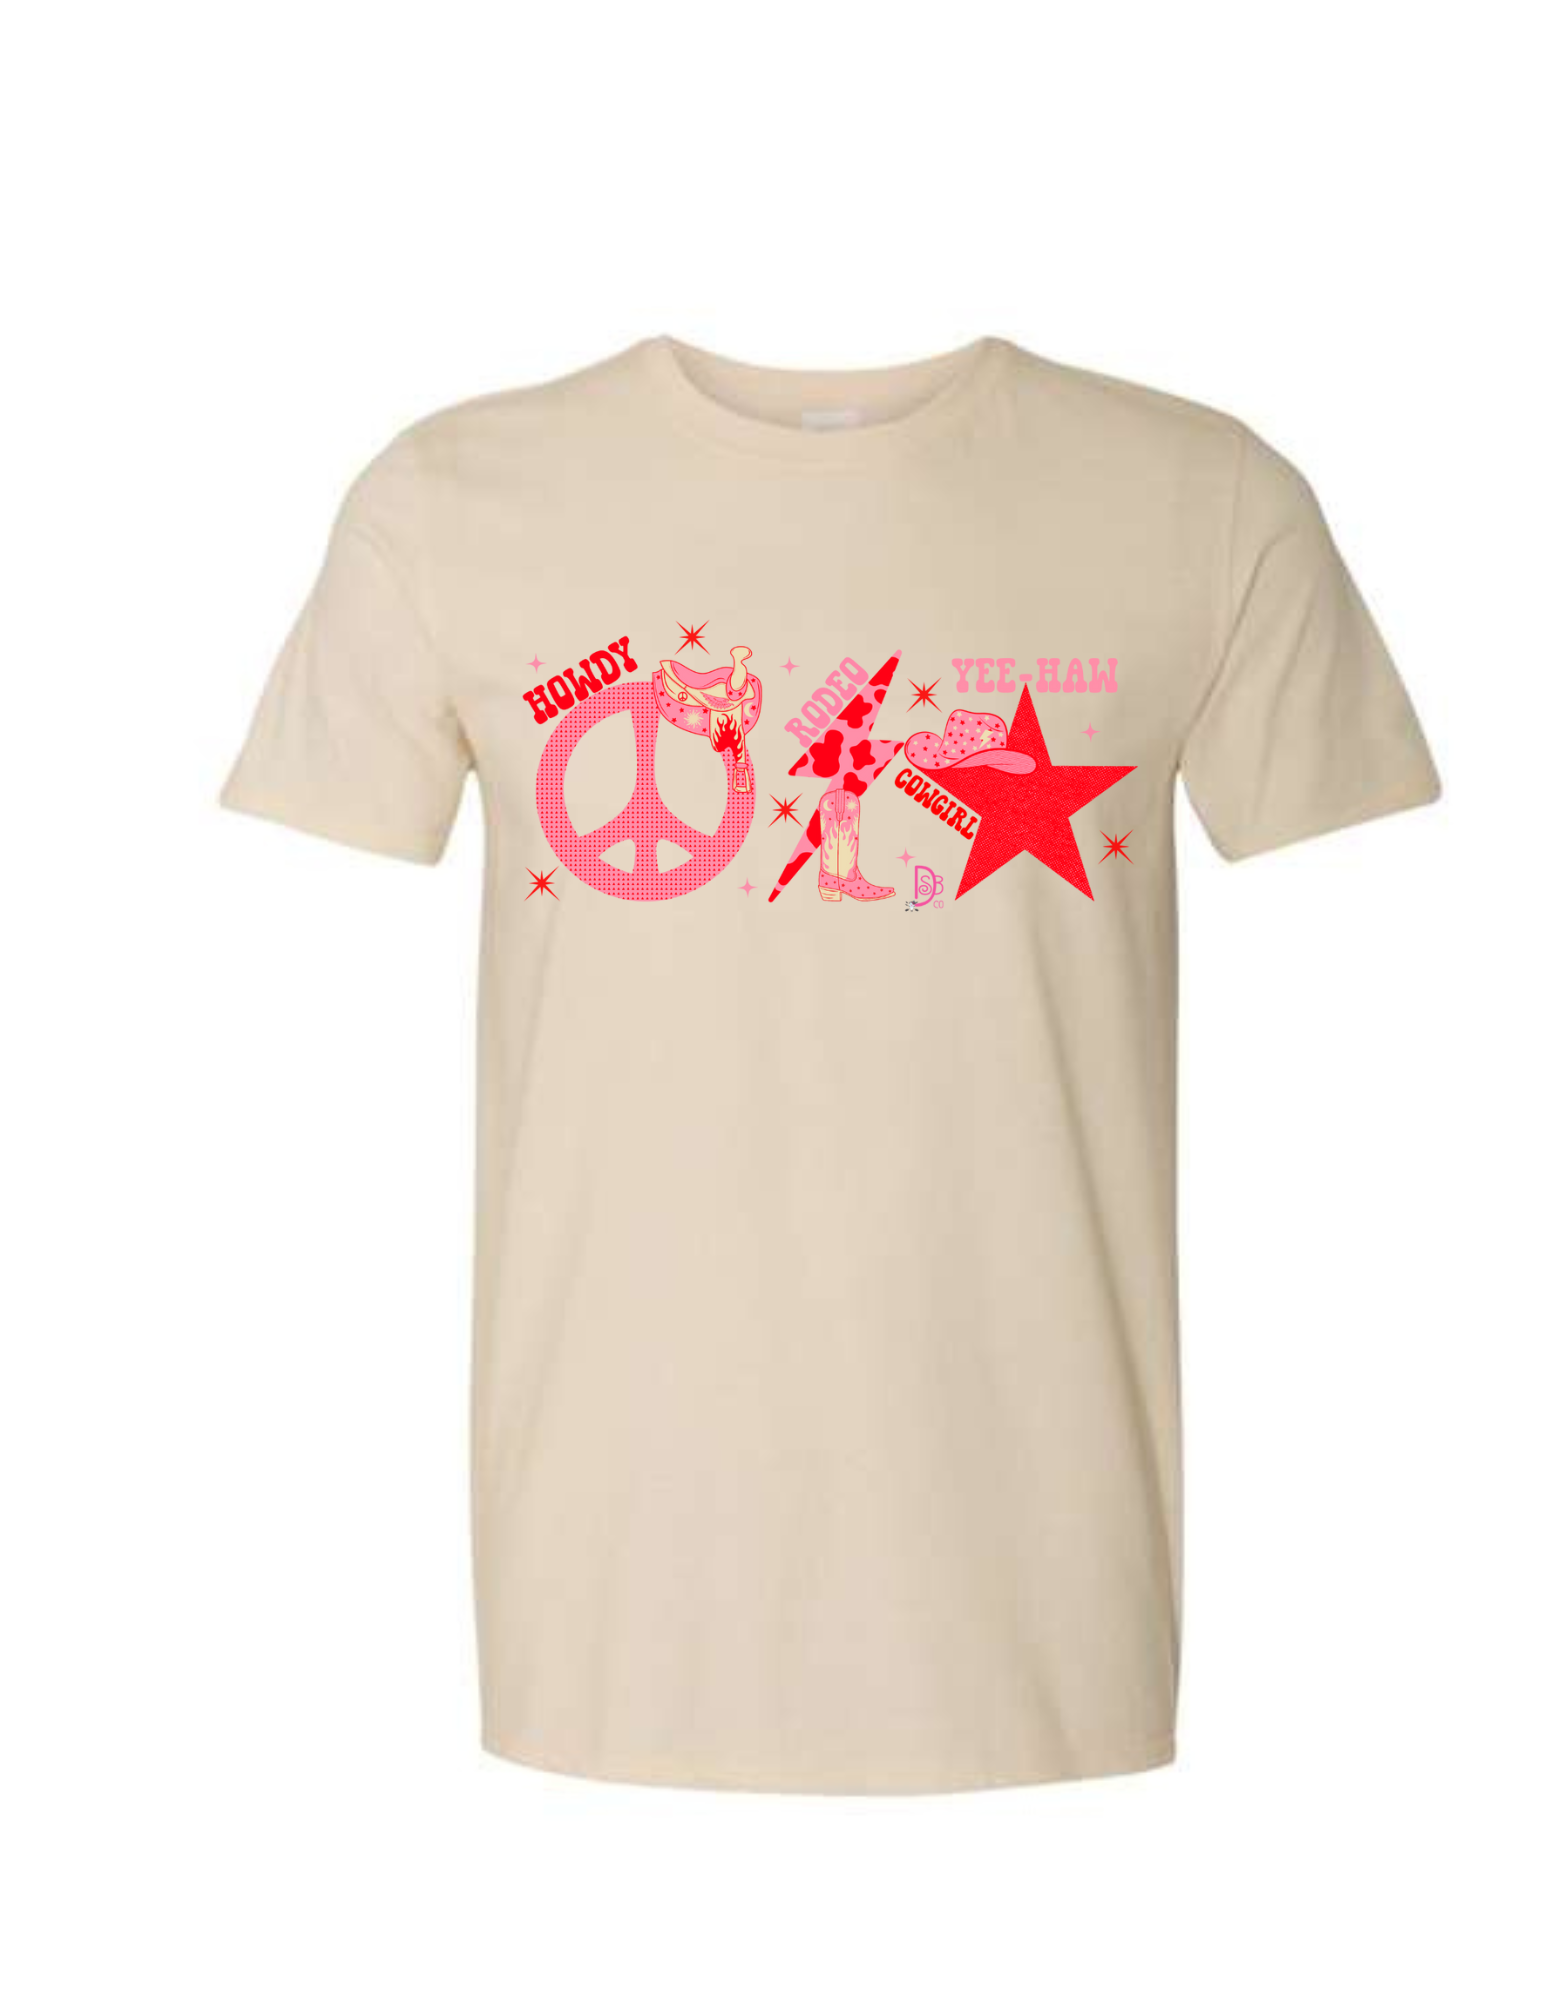 Pink Retro Cowgirl Graphic Tee-Graphic Tees-Deadwood South Boutique & Company-Deadwood South Boutique, Women's Fashion Boutique in Henderson, TX